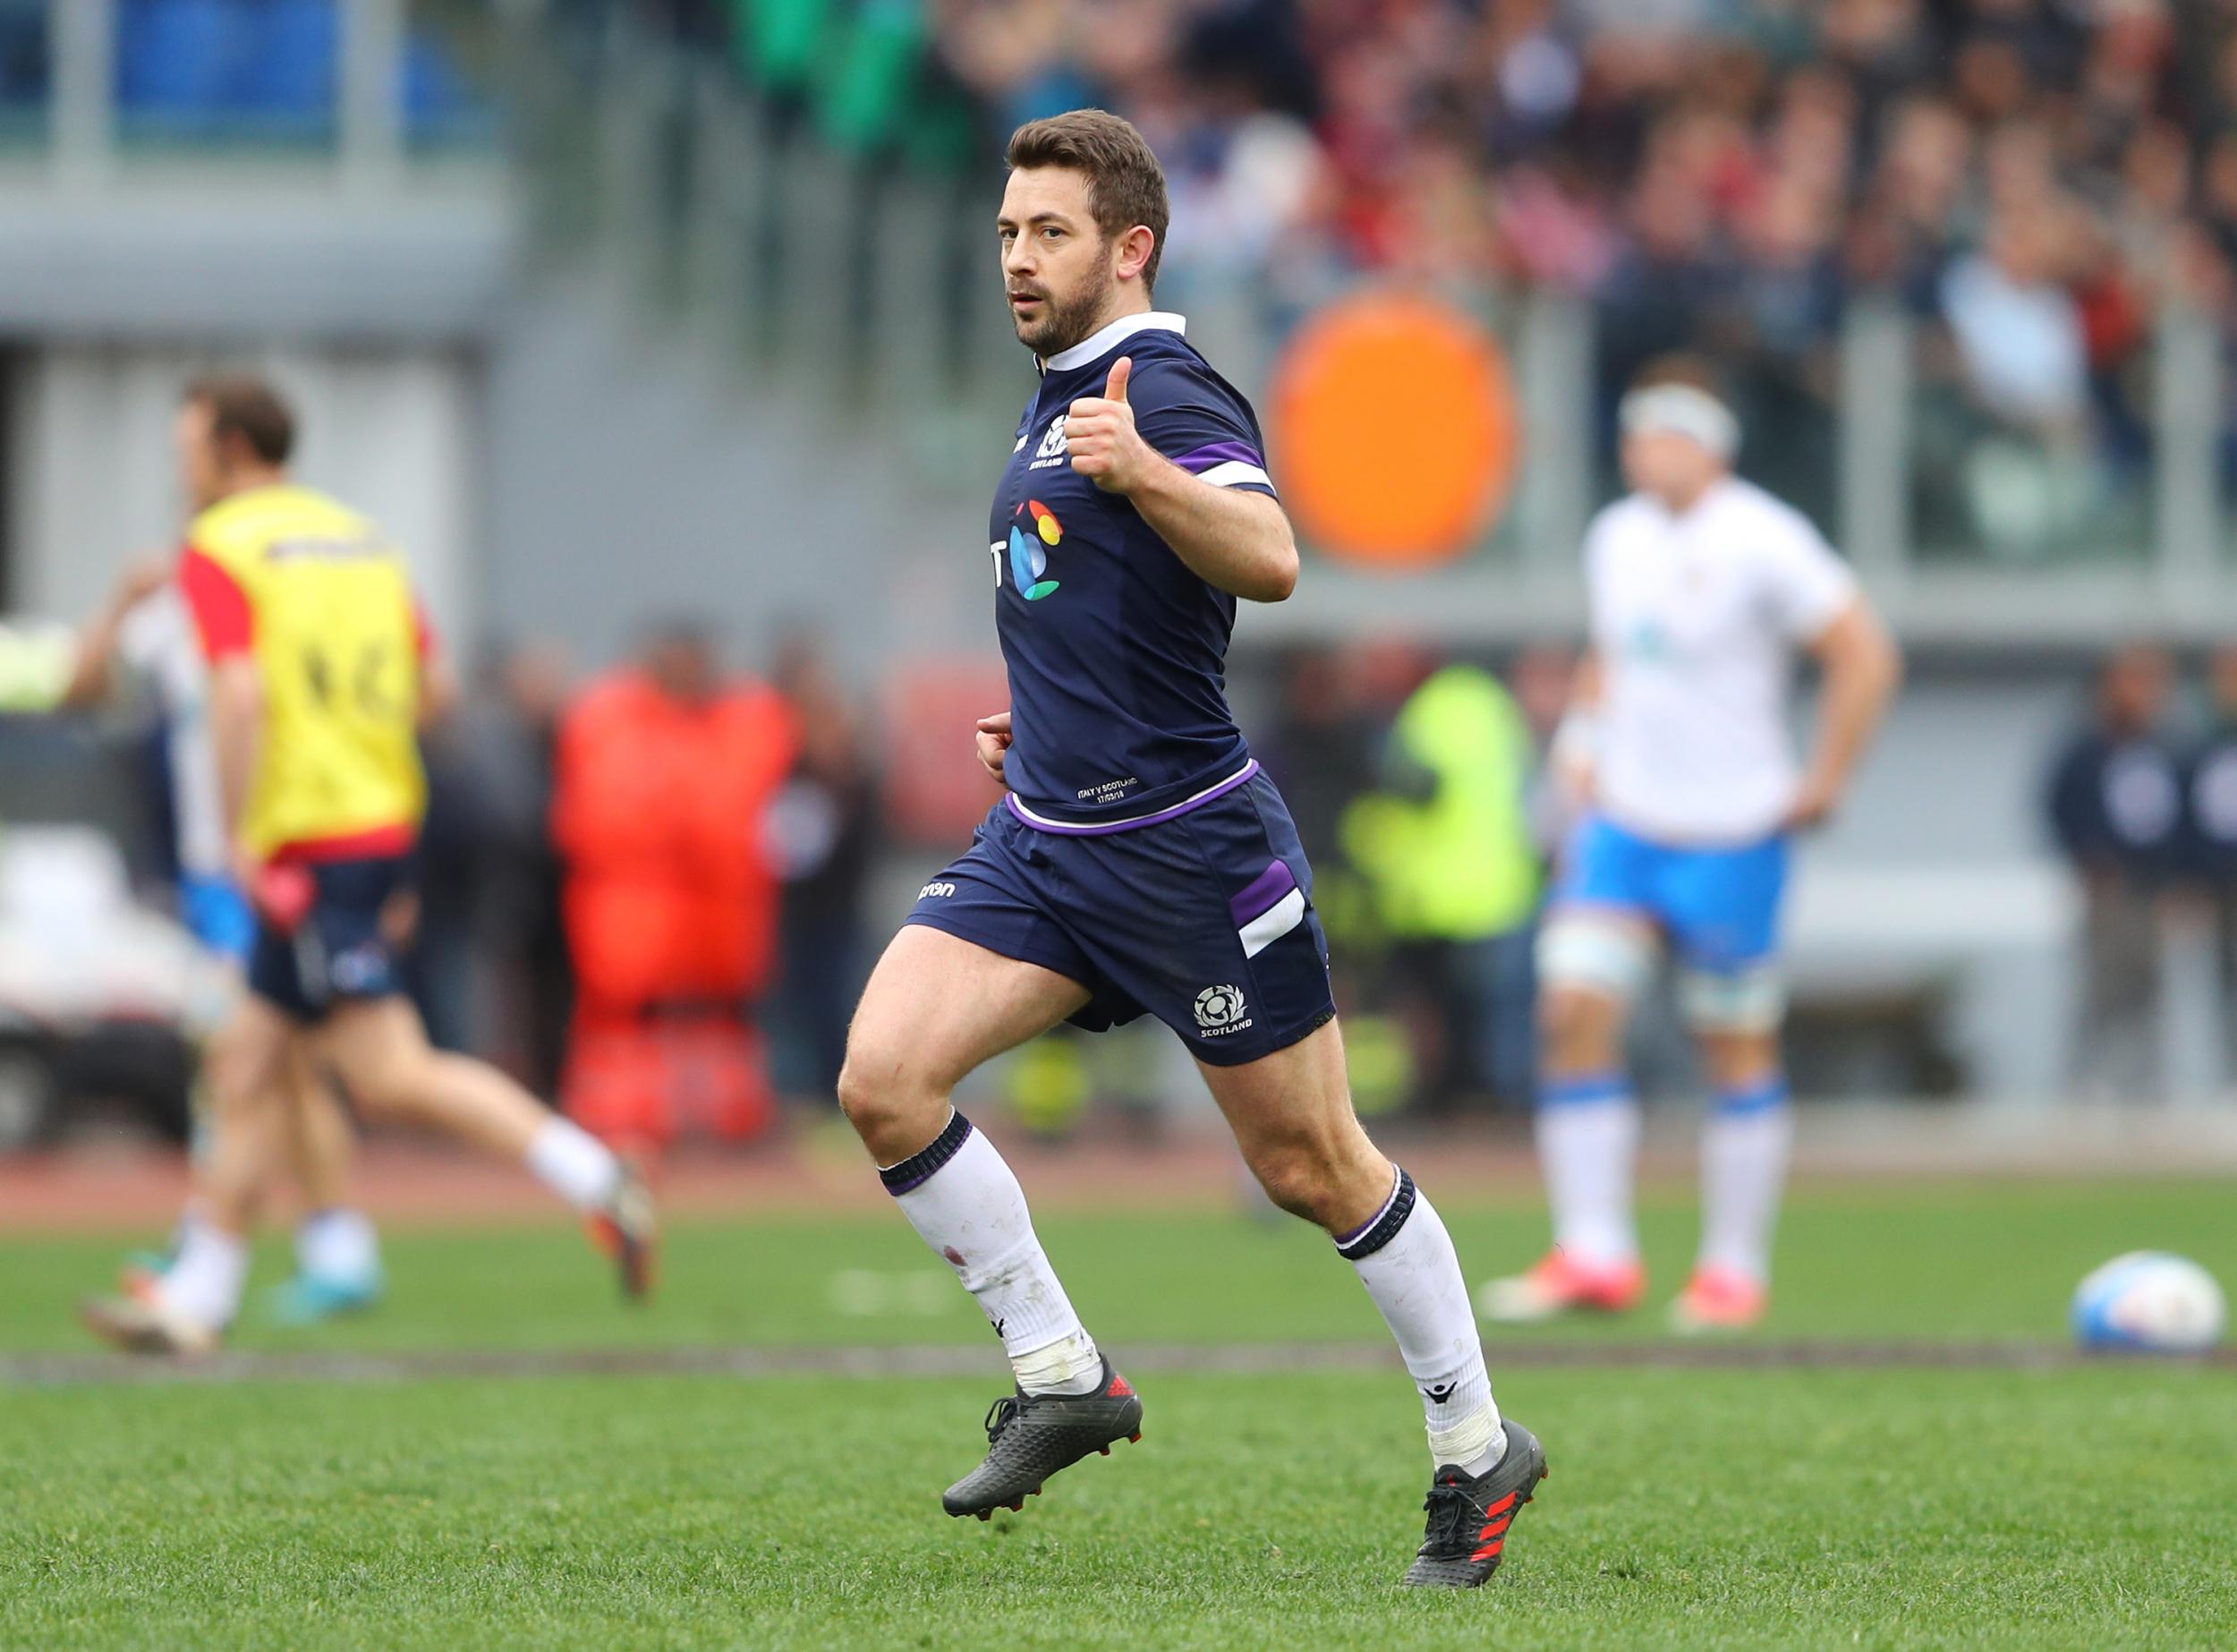 Greig Laidlaw kicked a penalty in the dying minutes to secure victory for the Scots